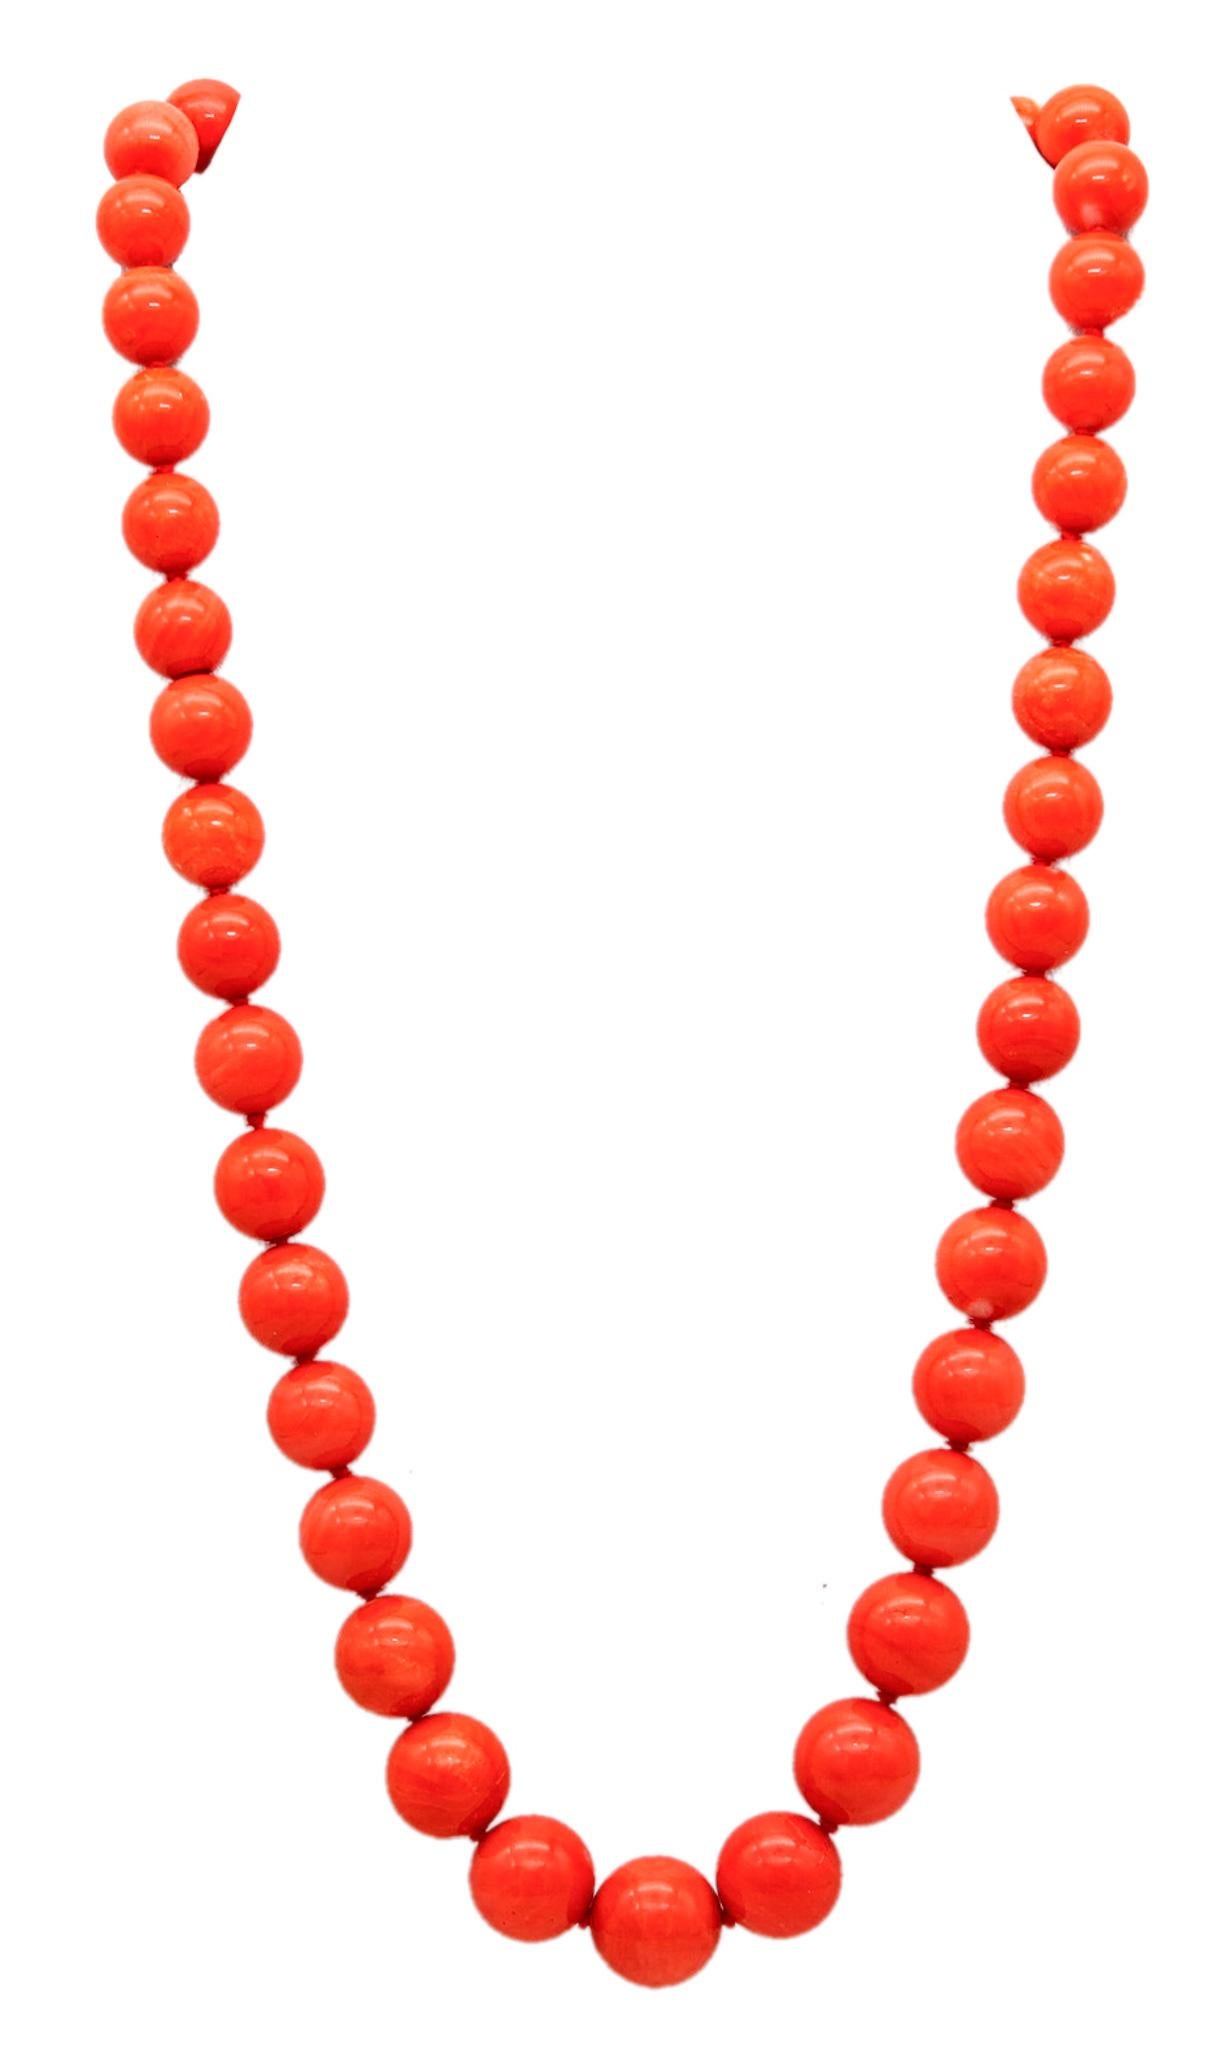 Graduated corals necklace designed by Bertoro.

An exceptional coral necklace, created in Arezzo Italy at the jewelry atelier of Bertoro. This necklace is composed by forty-three graduated beads of natural lustrous coral and is fitted with a